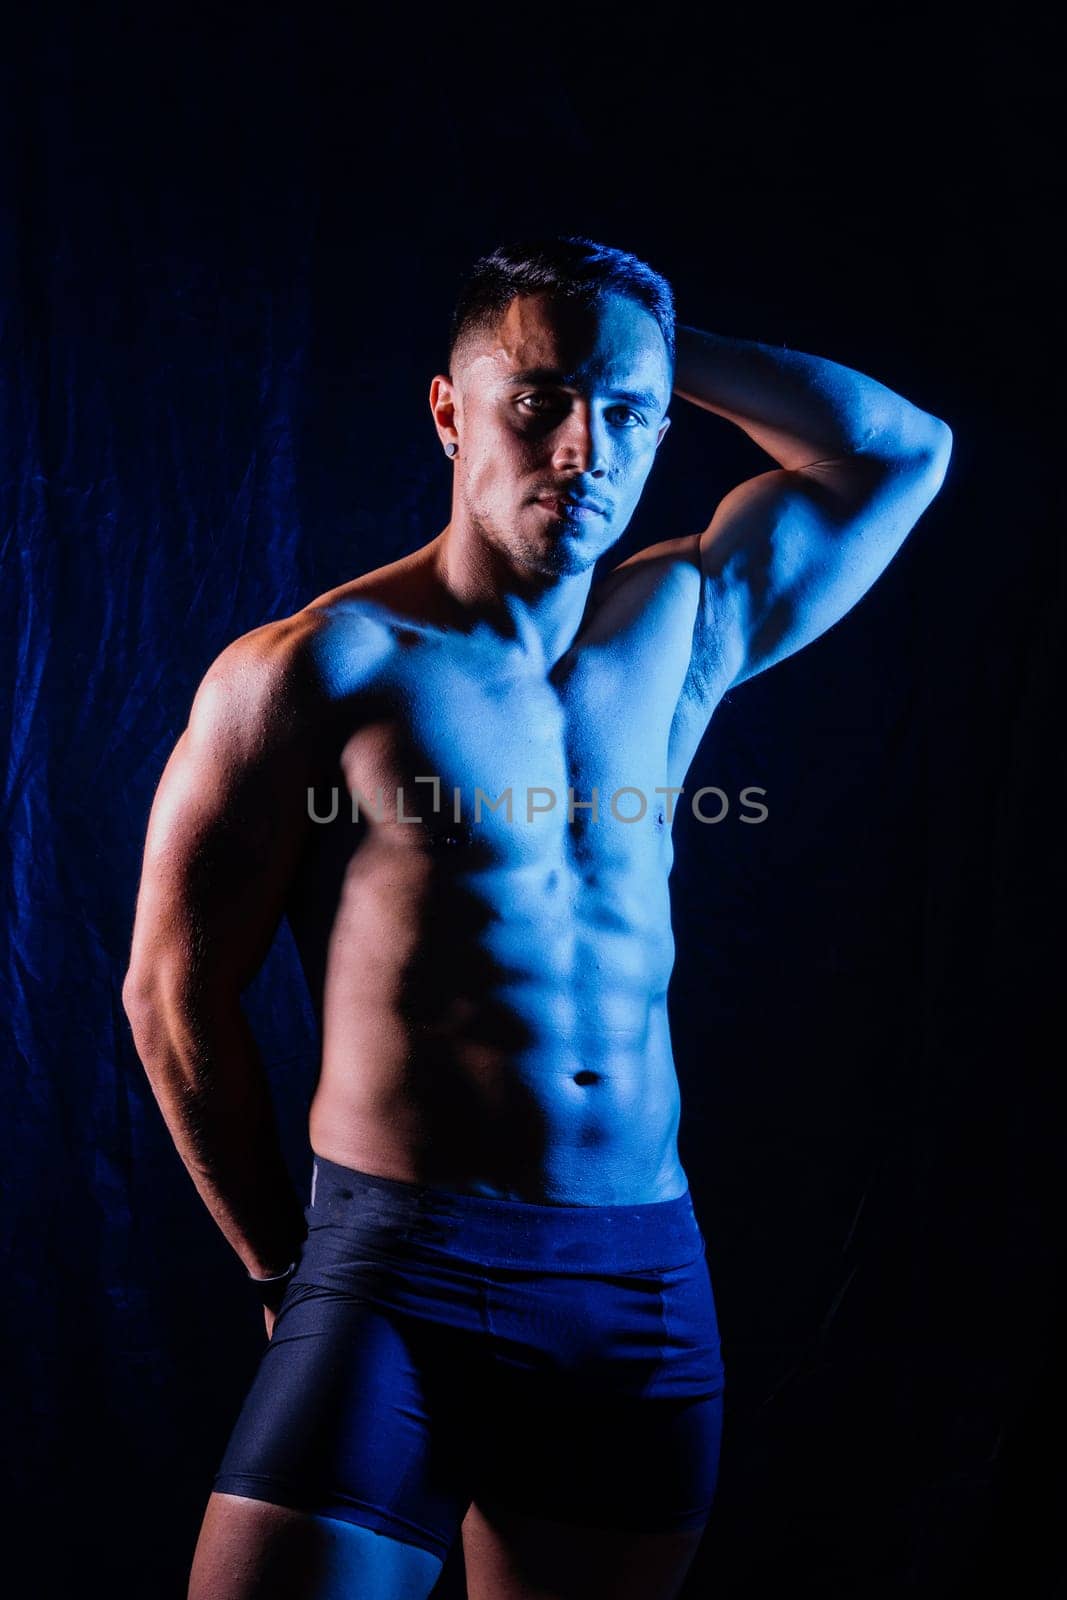 Man with exposed torso poses against black backdrop for flash photography by Zelenin